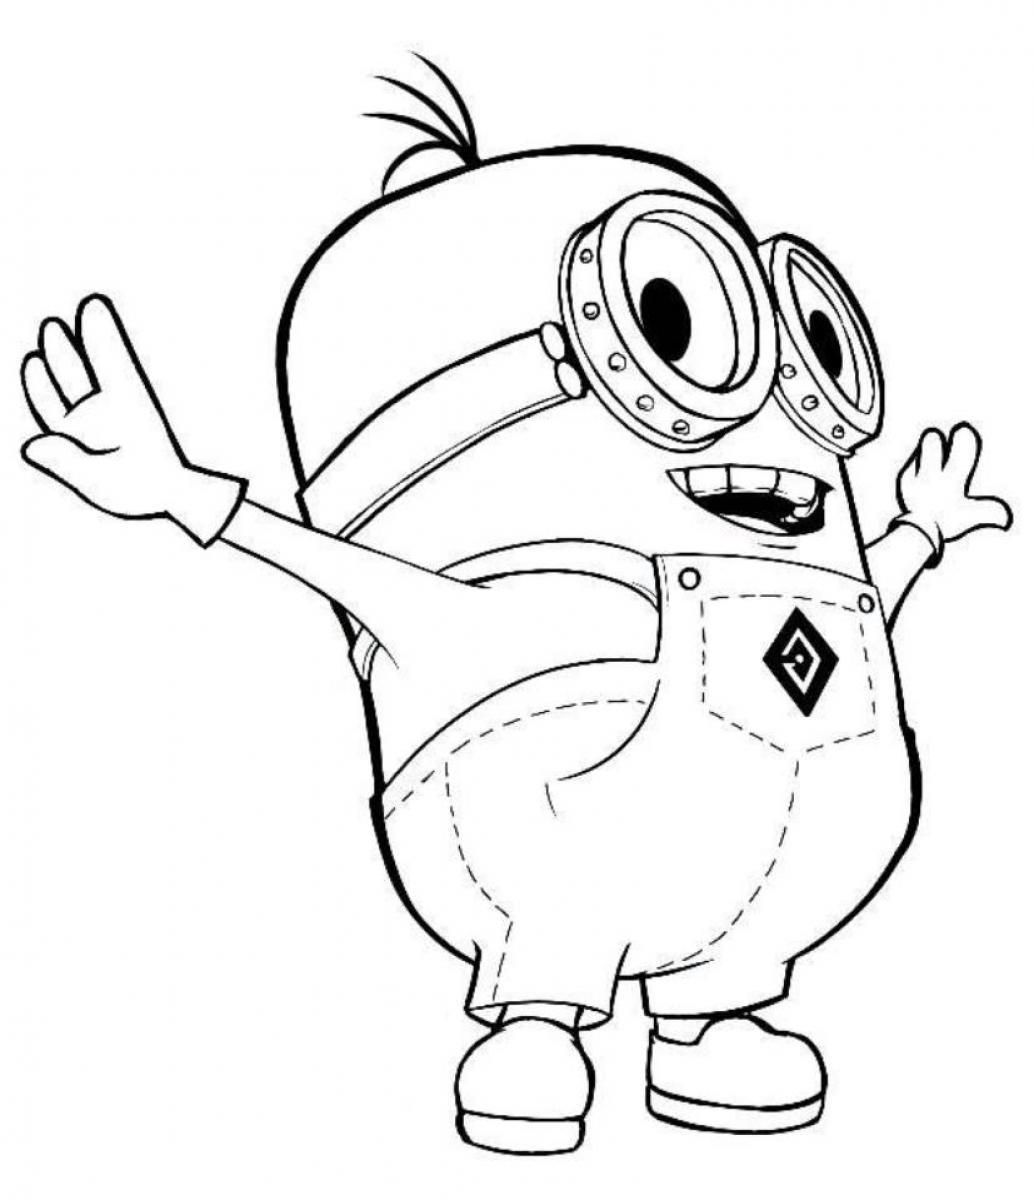 7 Pics of Minion From Despicable Coloring Pages - Bob Minion ...